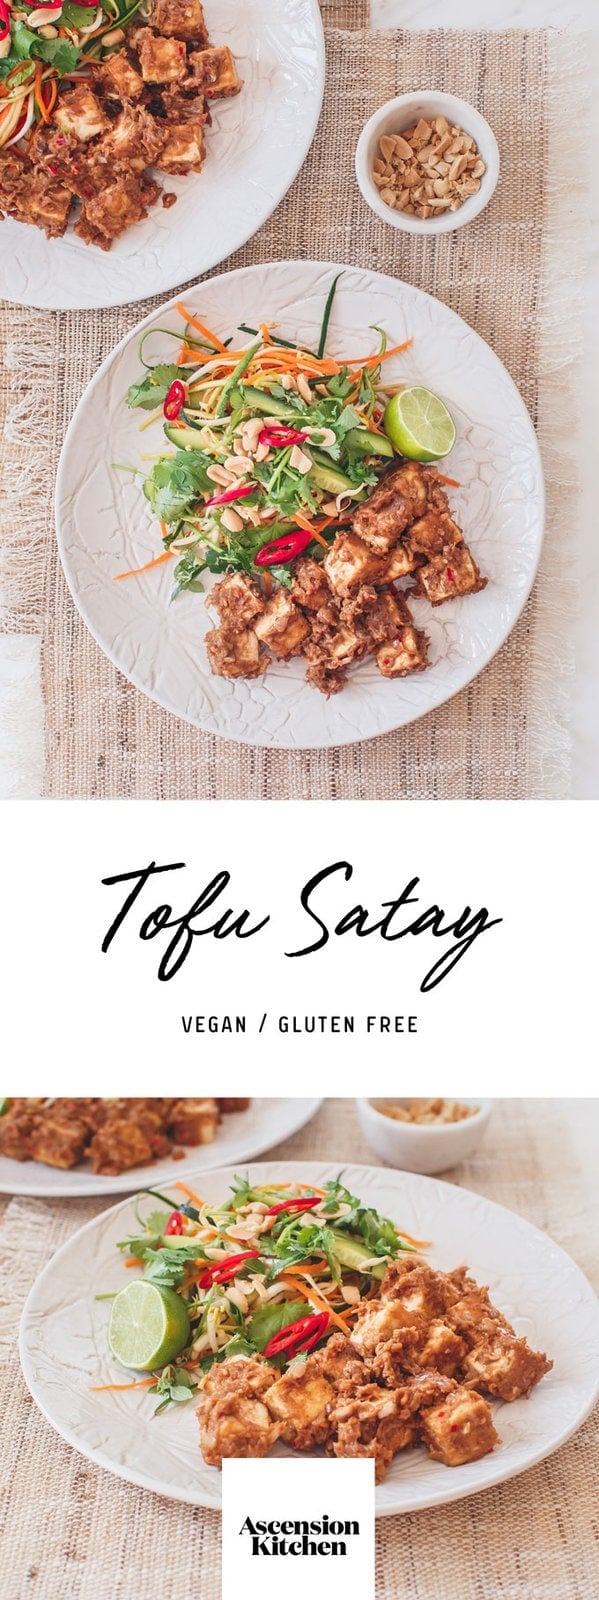 Vegan Tofu Satay – tofu cubes in a spicy peanut satay sauce paired with a crisp raw salad. Healthy and indulgent! ⠀⠀⠀ #vegantofusatay #tofusataycurry #tofusatayhealthy #vegansataysauce #vegansatayrecipe #vegansataytofu #vegansatayglutenfree #AscensionKitchen ⠀⠀⠀ // Pin to your own inspiration board! //